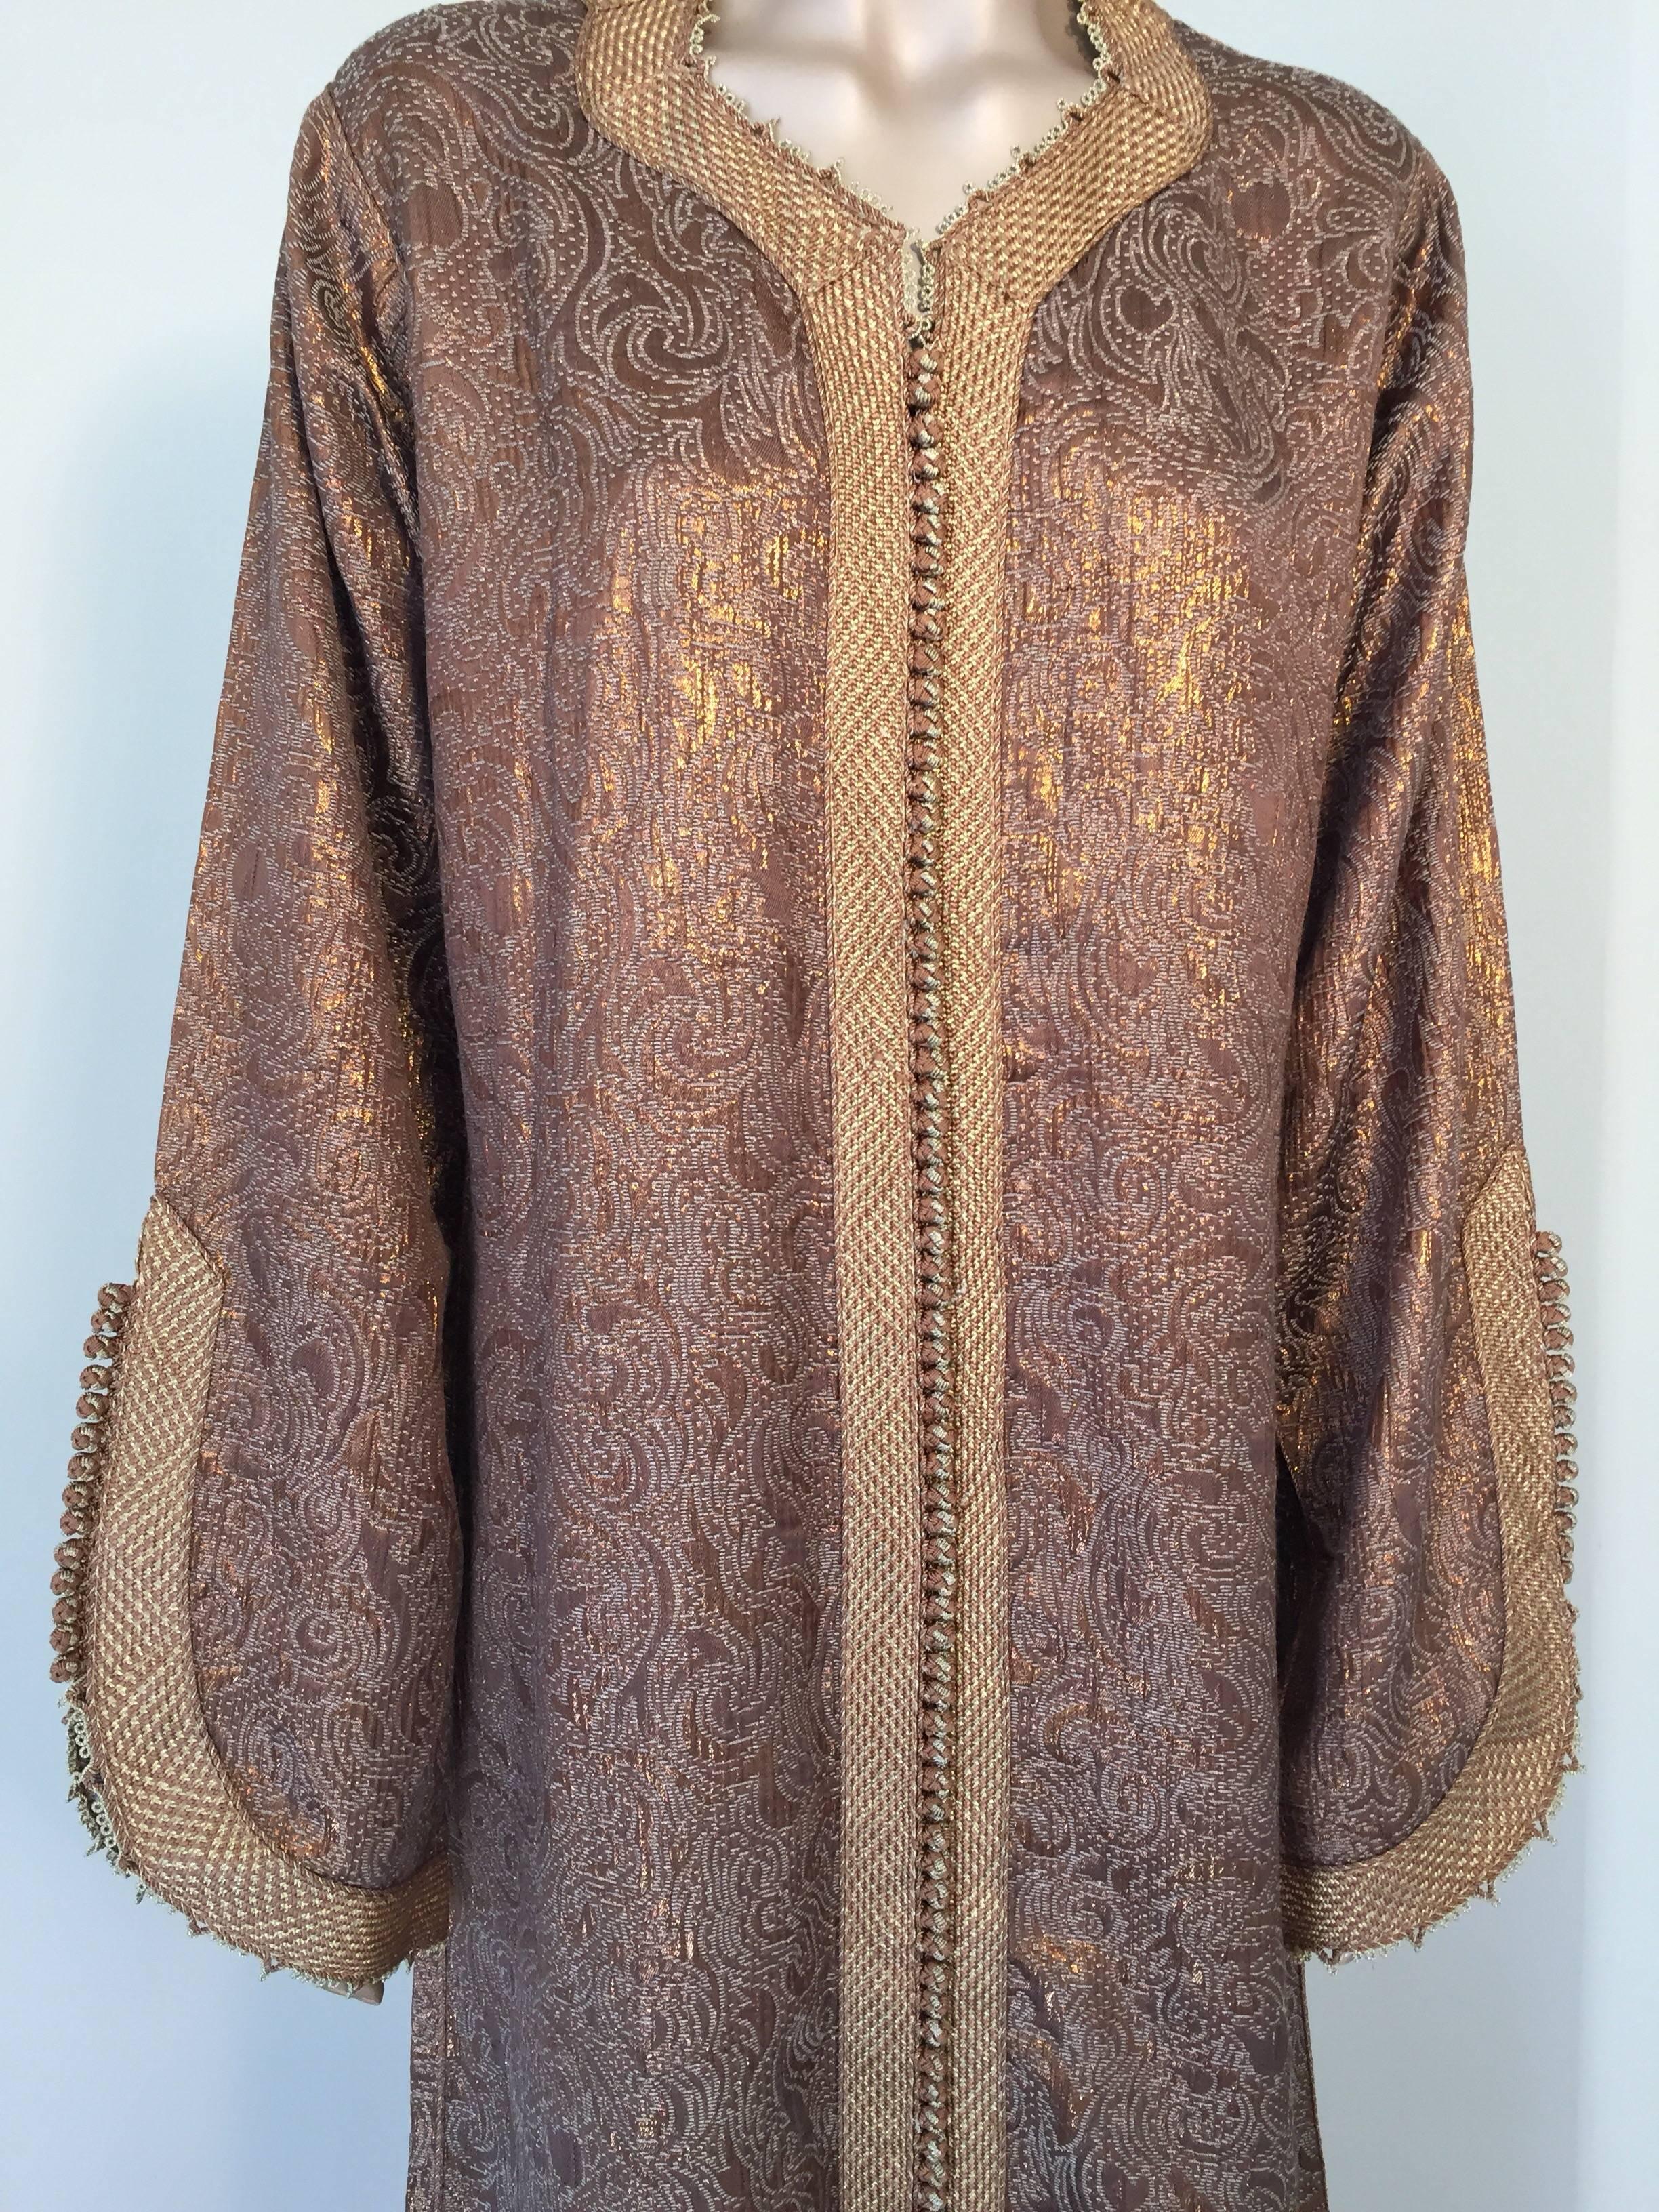 Moroccan Caftan 1970s, North Africa, Morocco Metallic Bronze and Gold Color 2